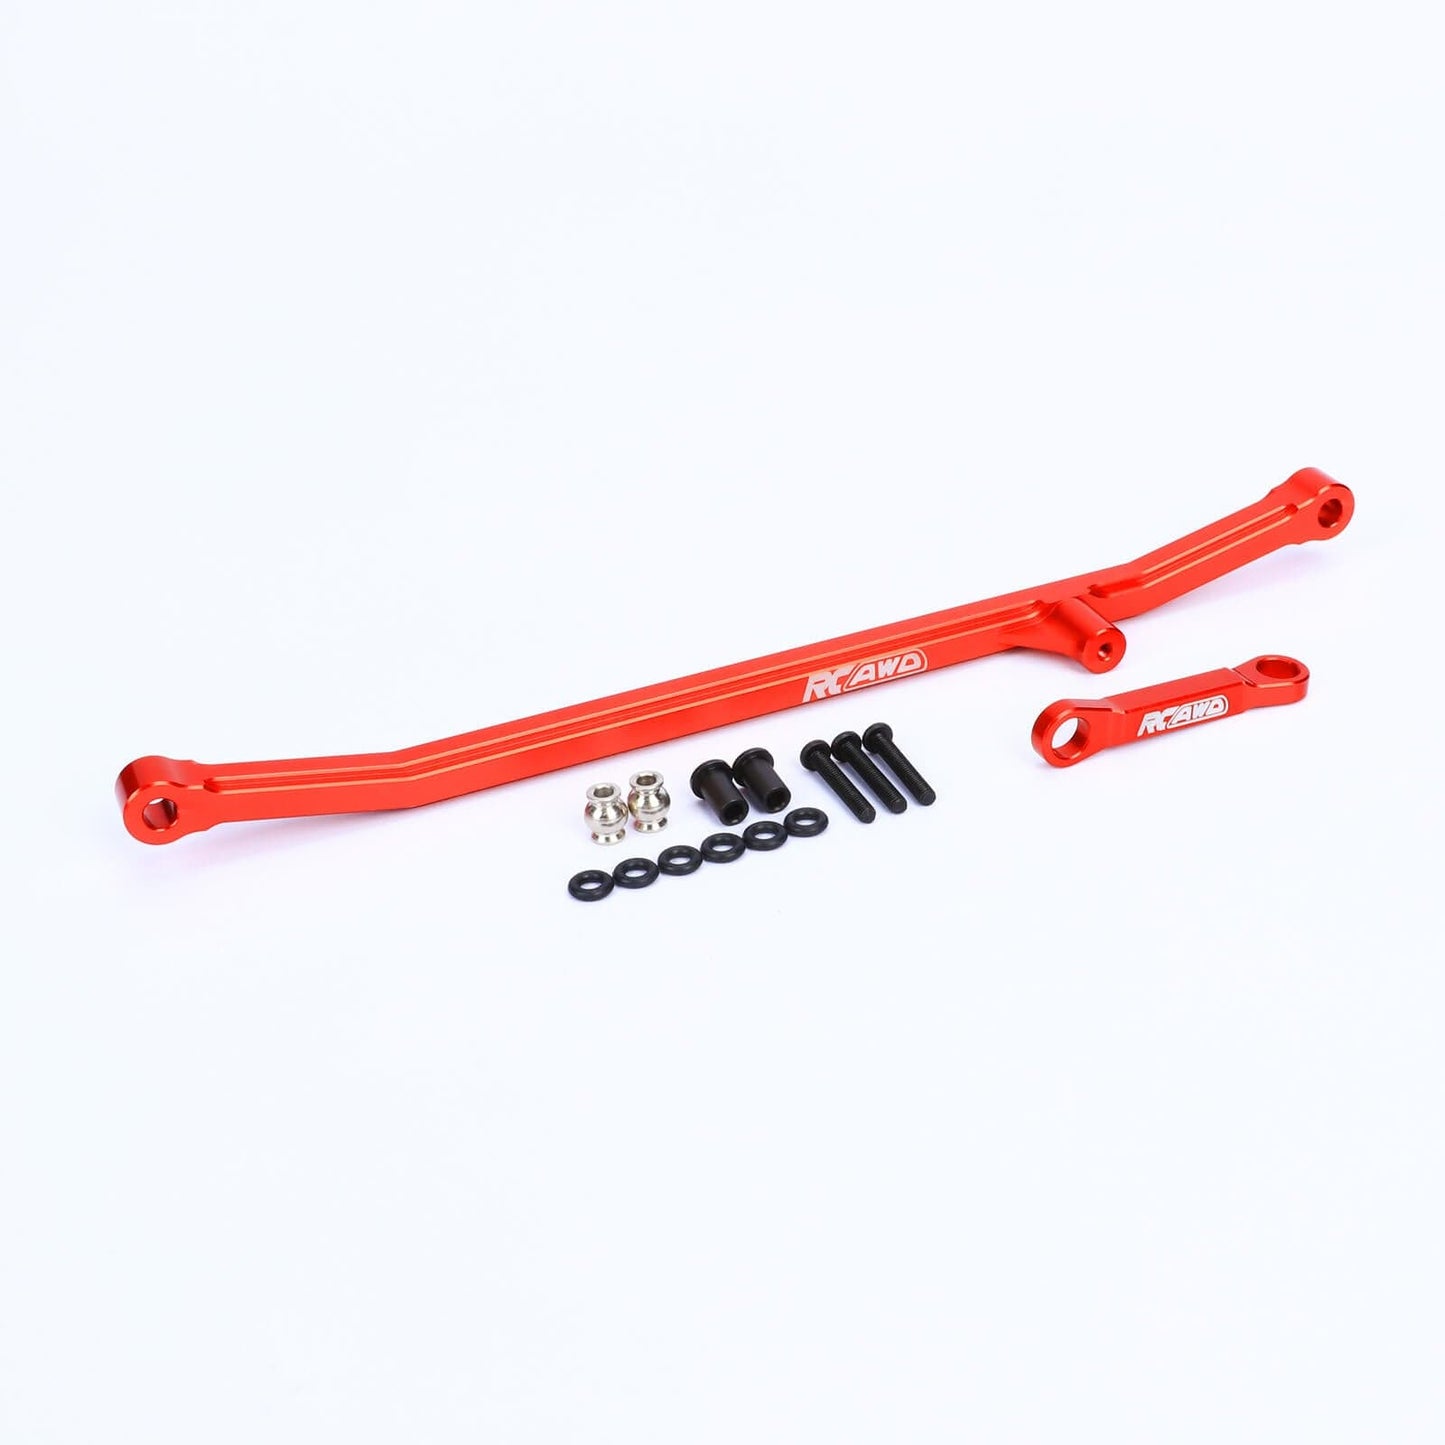 RCAWD LOSI 1/8 LMT RCAWD Losi LMT Upgrades Aluminum Steering Linkage Set